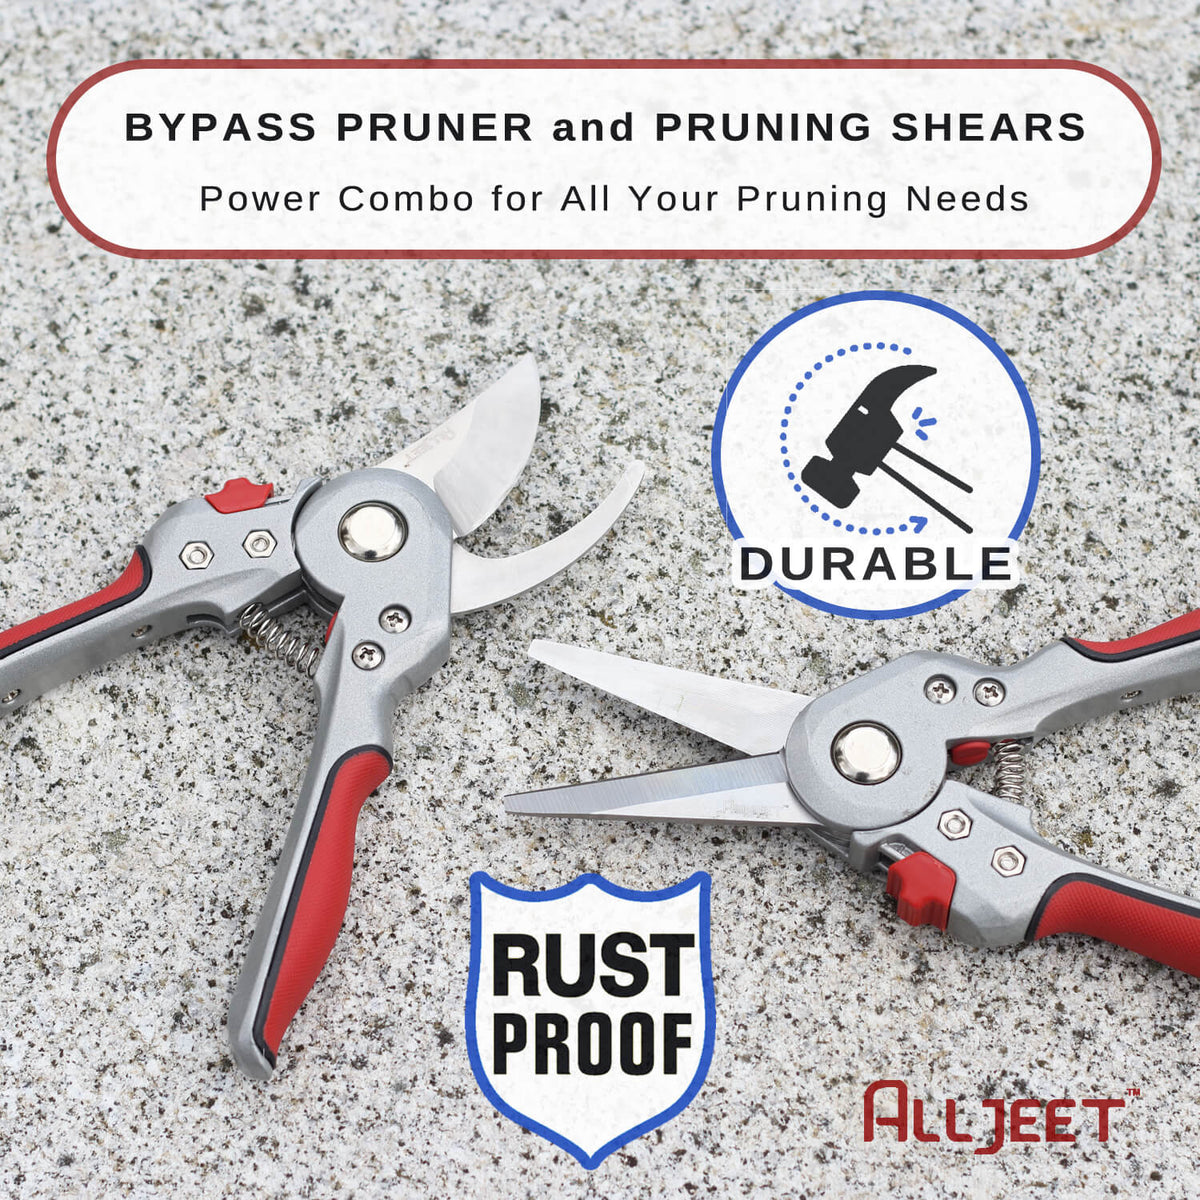 power combination of pruner and shears, both heavy full metal construction